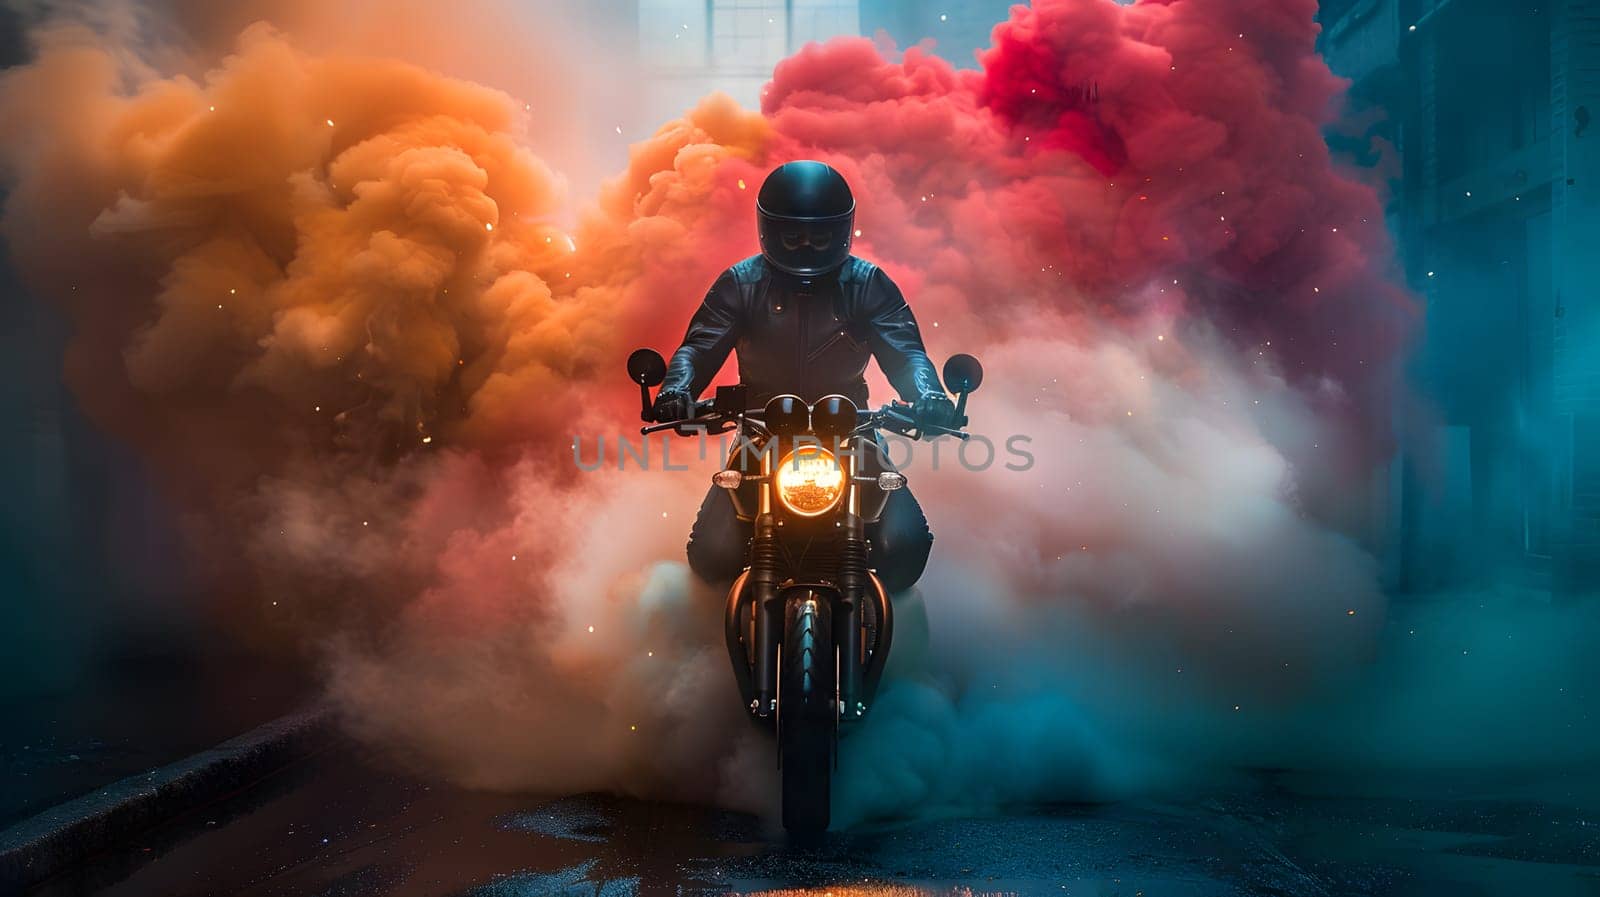 A man is riding a motorcycle through a cloud of smoke, with the automotive lighting illuminating the tire. The atmospheric phenomenon creates a dramatic landscape against the sky